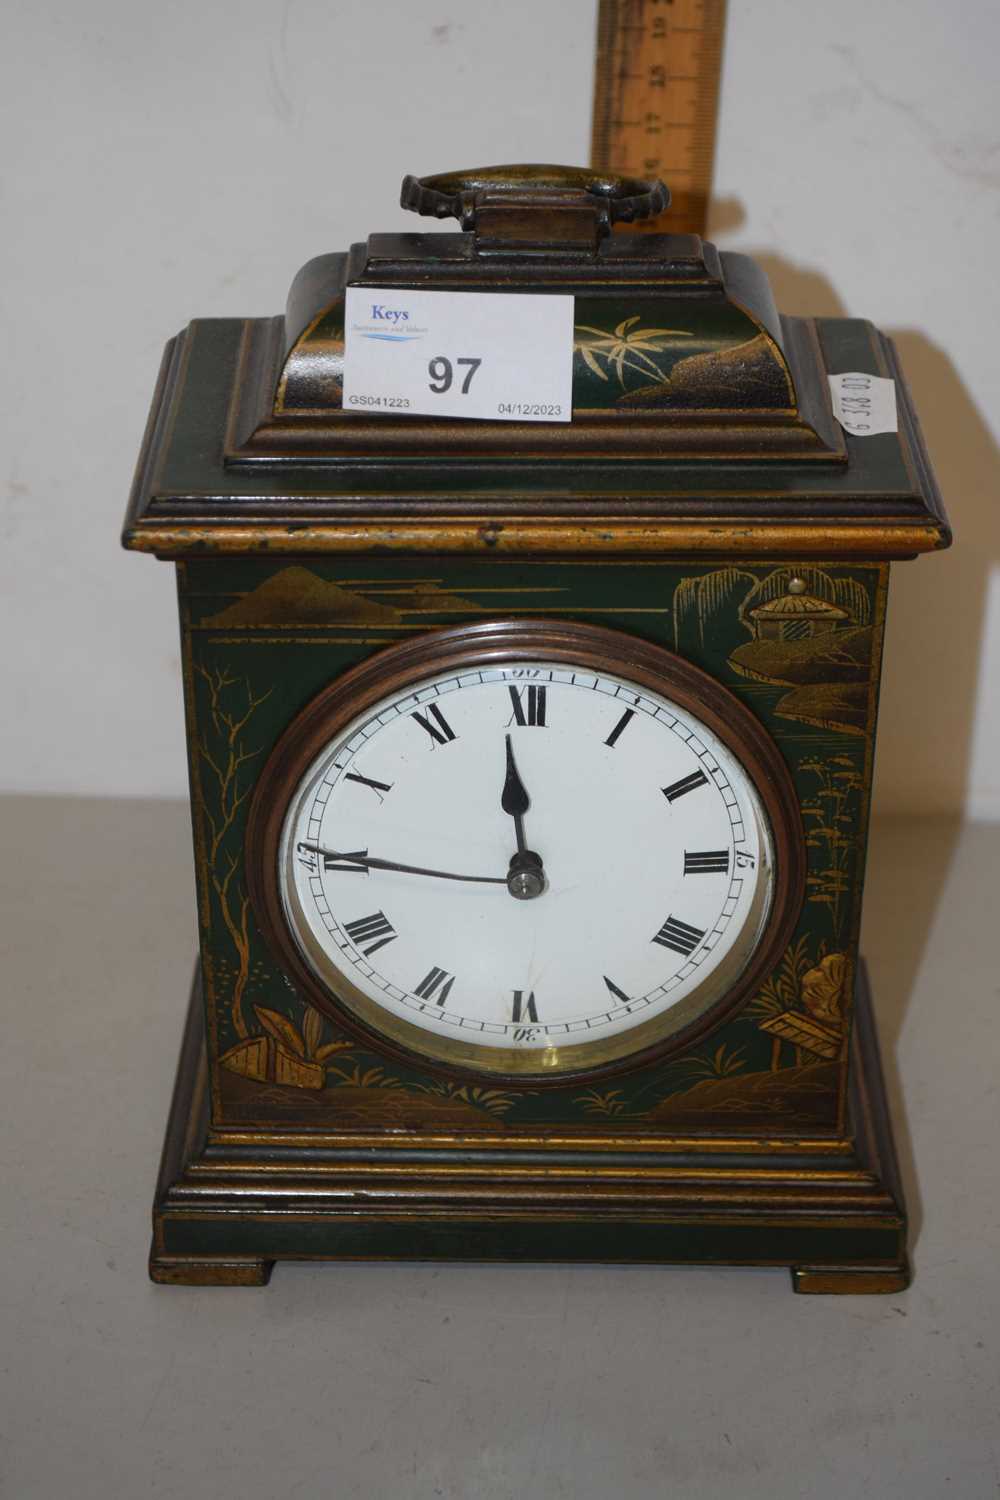 Early 20th Century mantel clock in a green japaned finish case